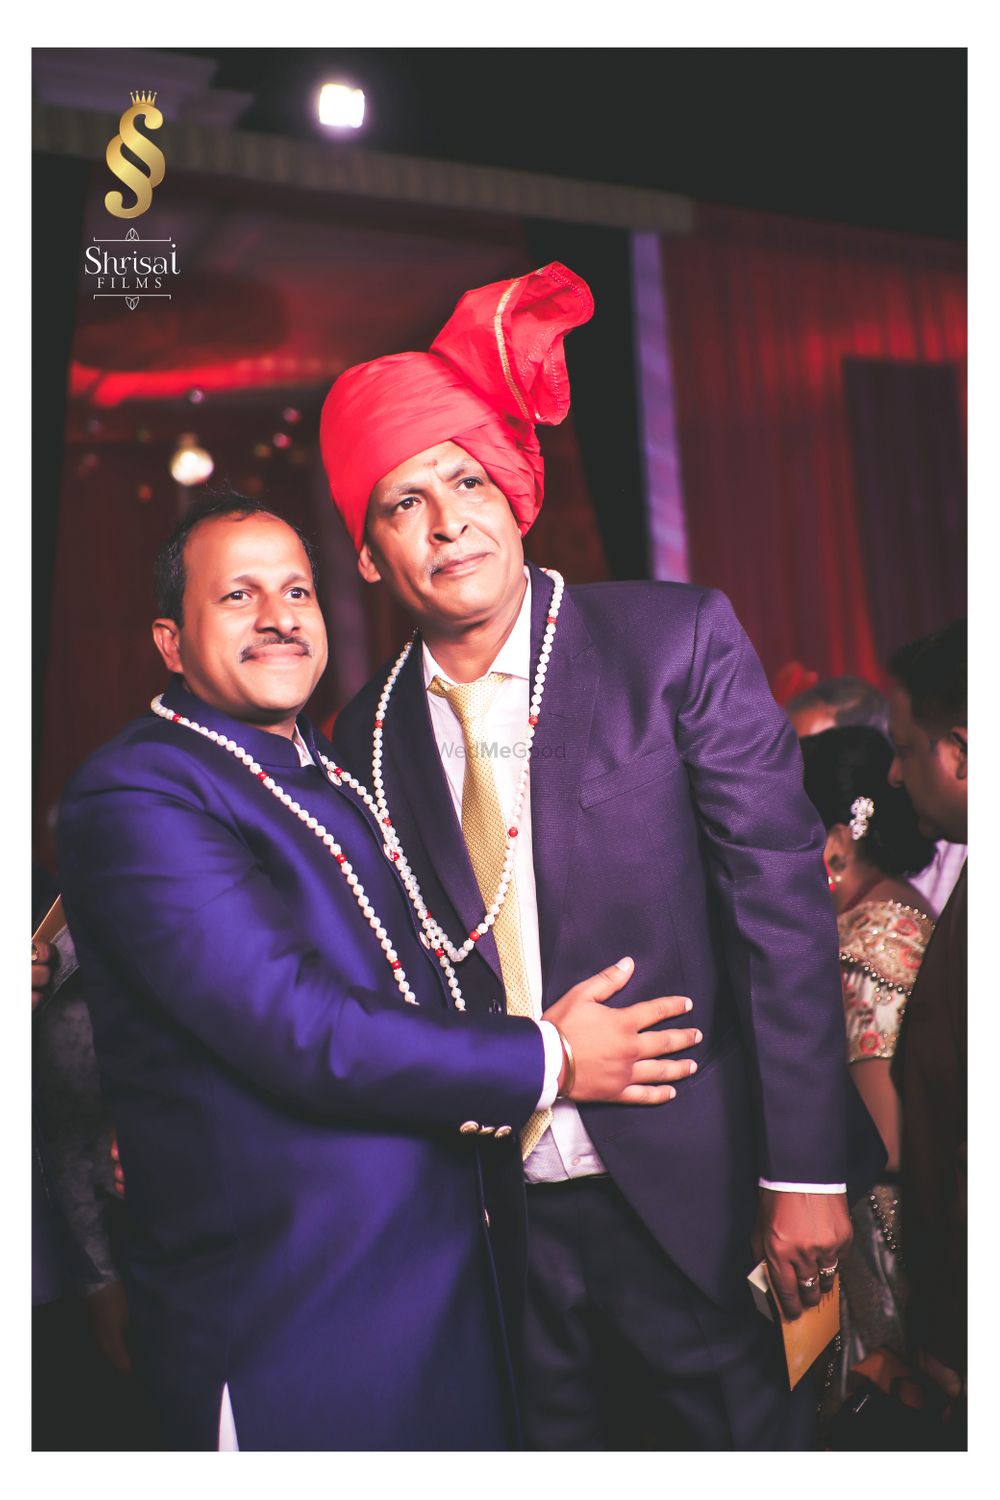 Photo From Candid Photography - By Shri Sai Films